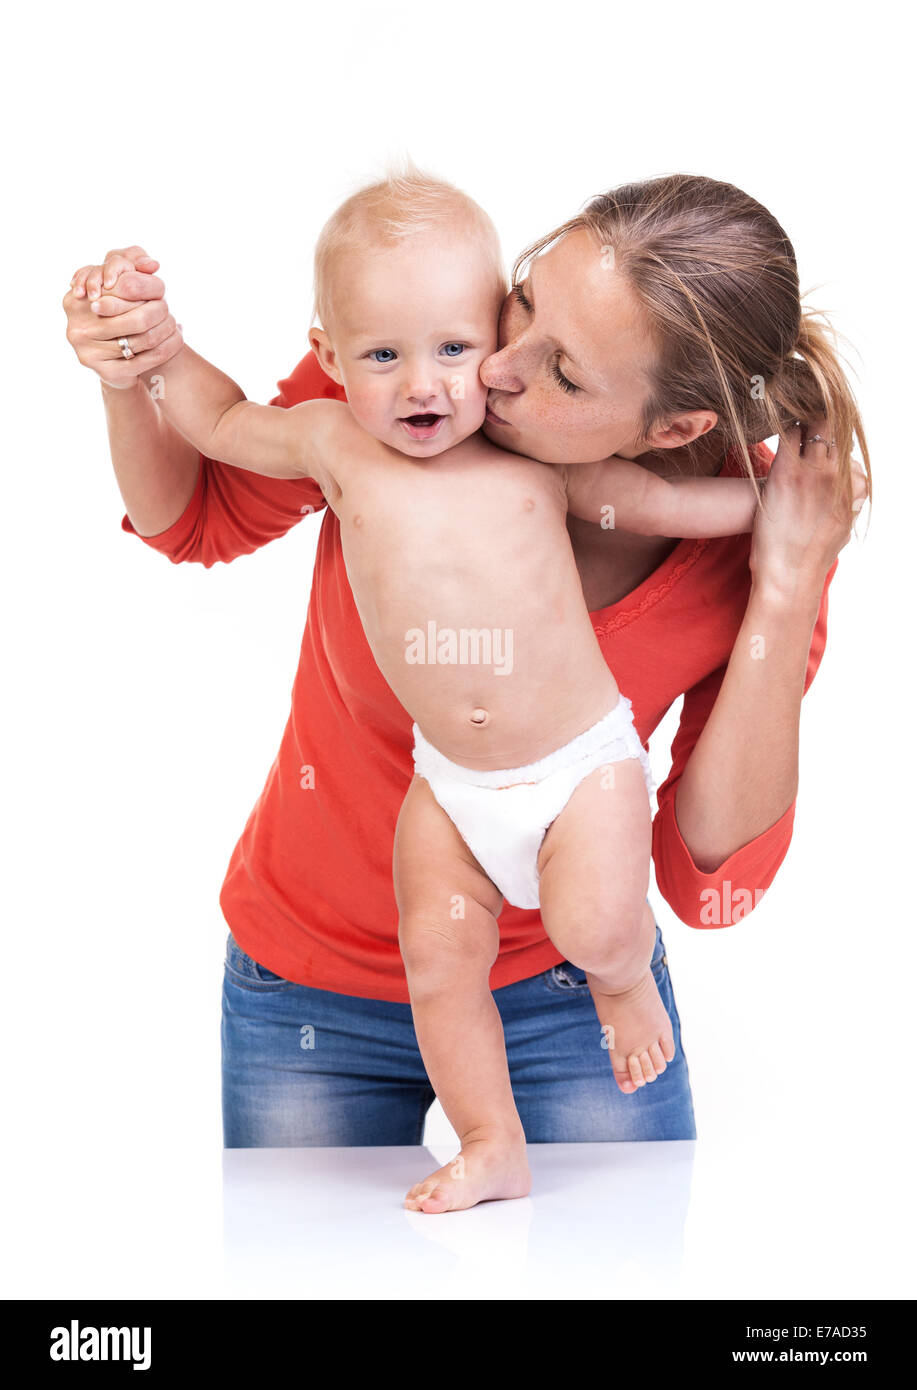 Baby boy learning to walk with mother's help over white Stock Photo